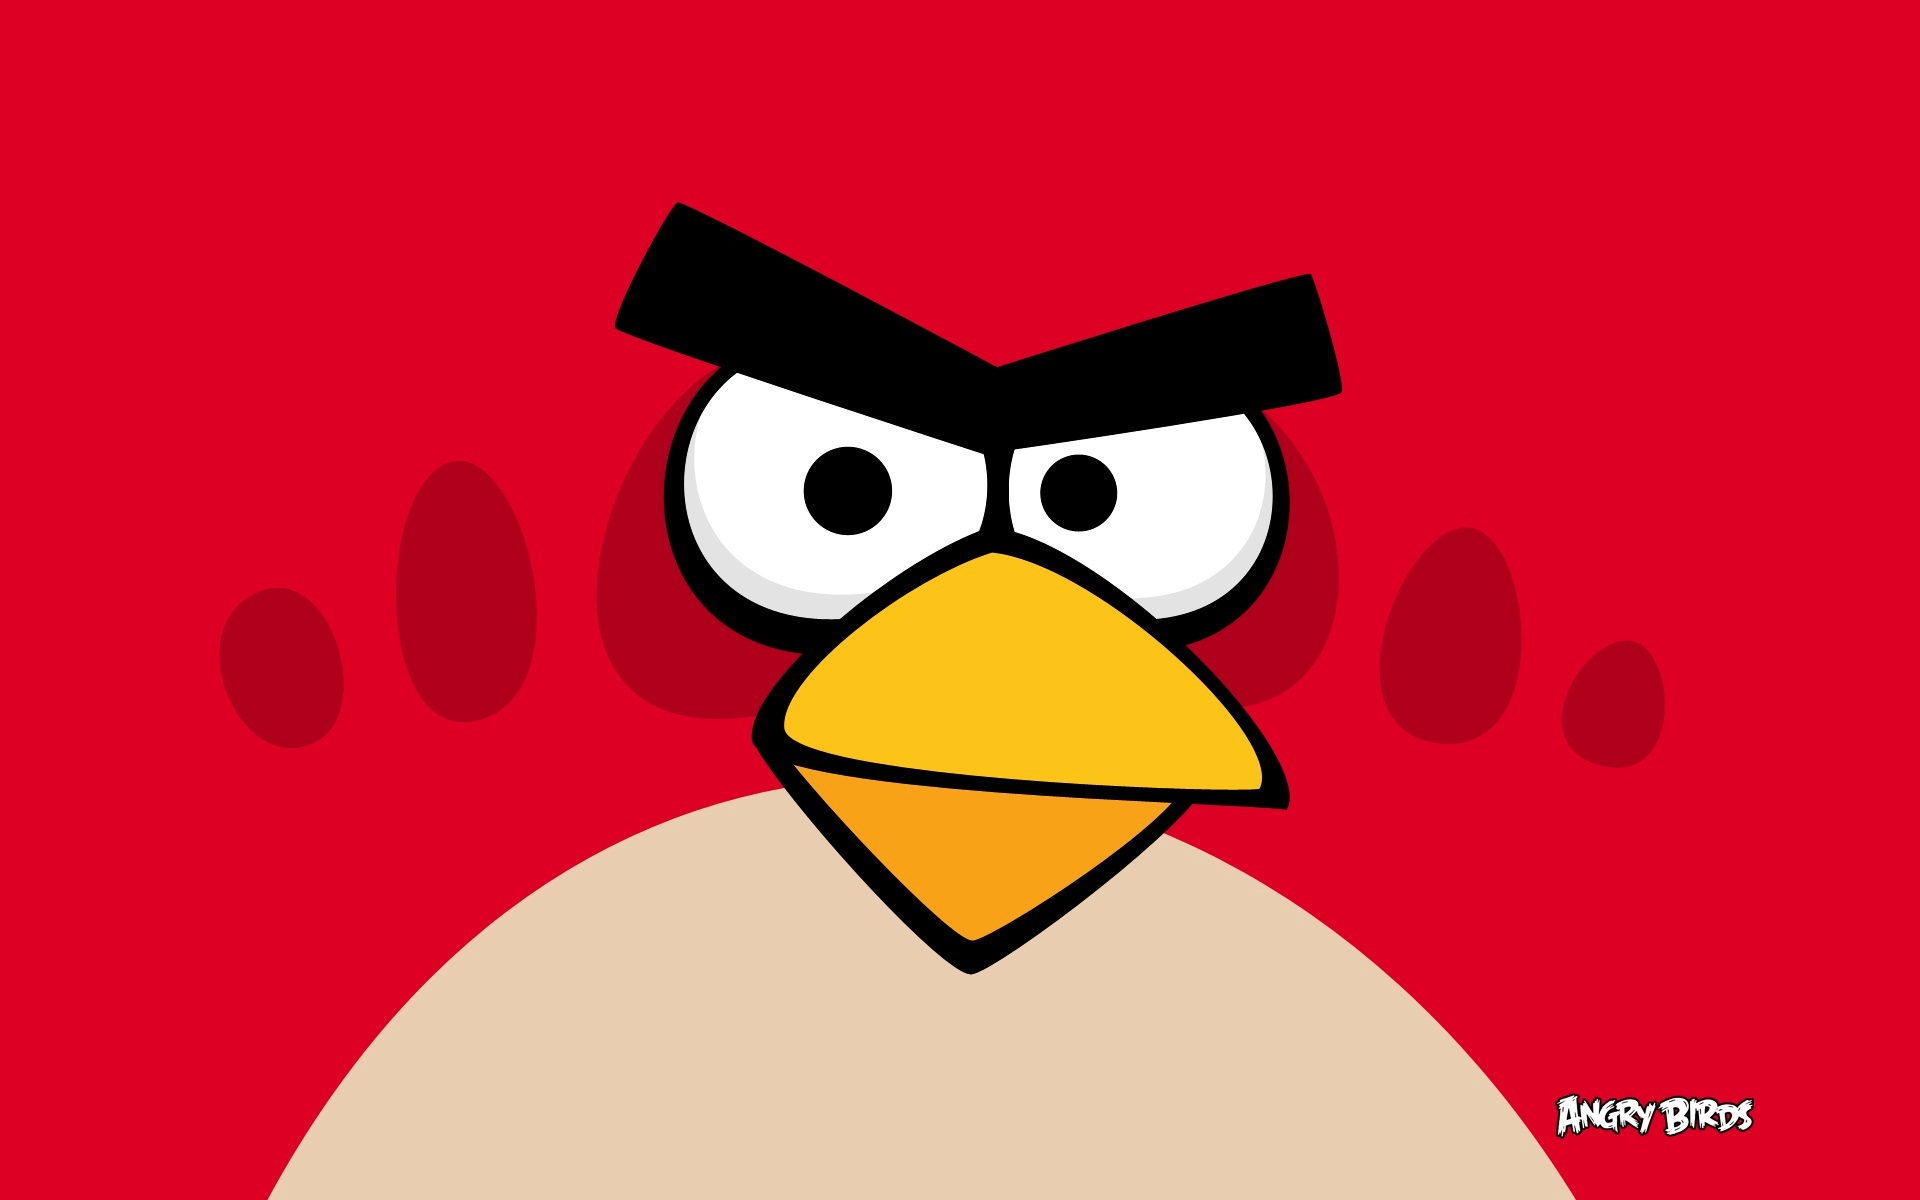 Angry Birds Wallpapers Hd Wallpapers Free Download - Windows 10 Angry Birds Theme - HD Wallpaper 